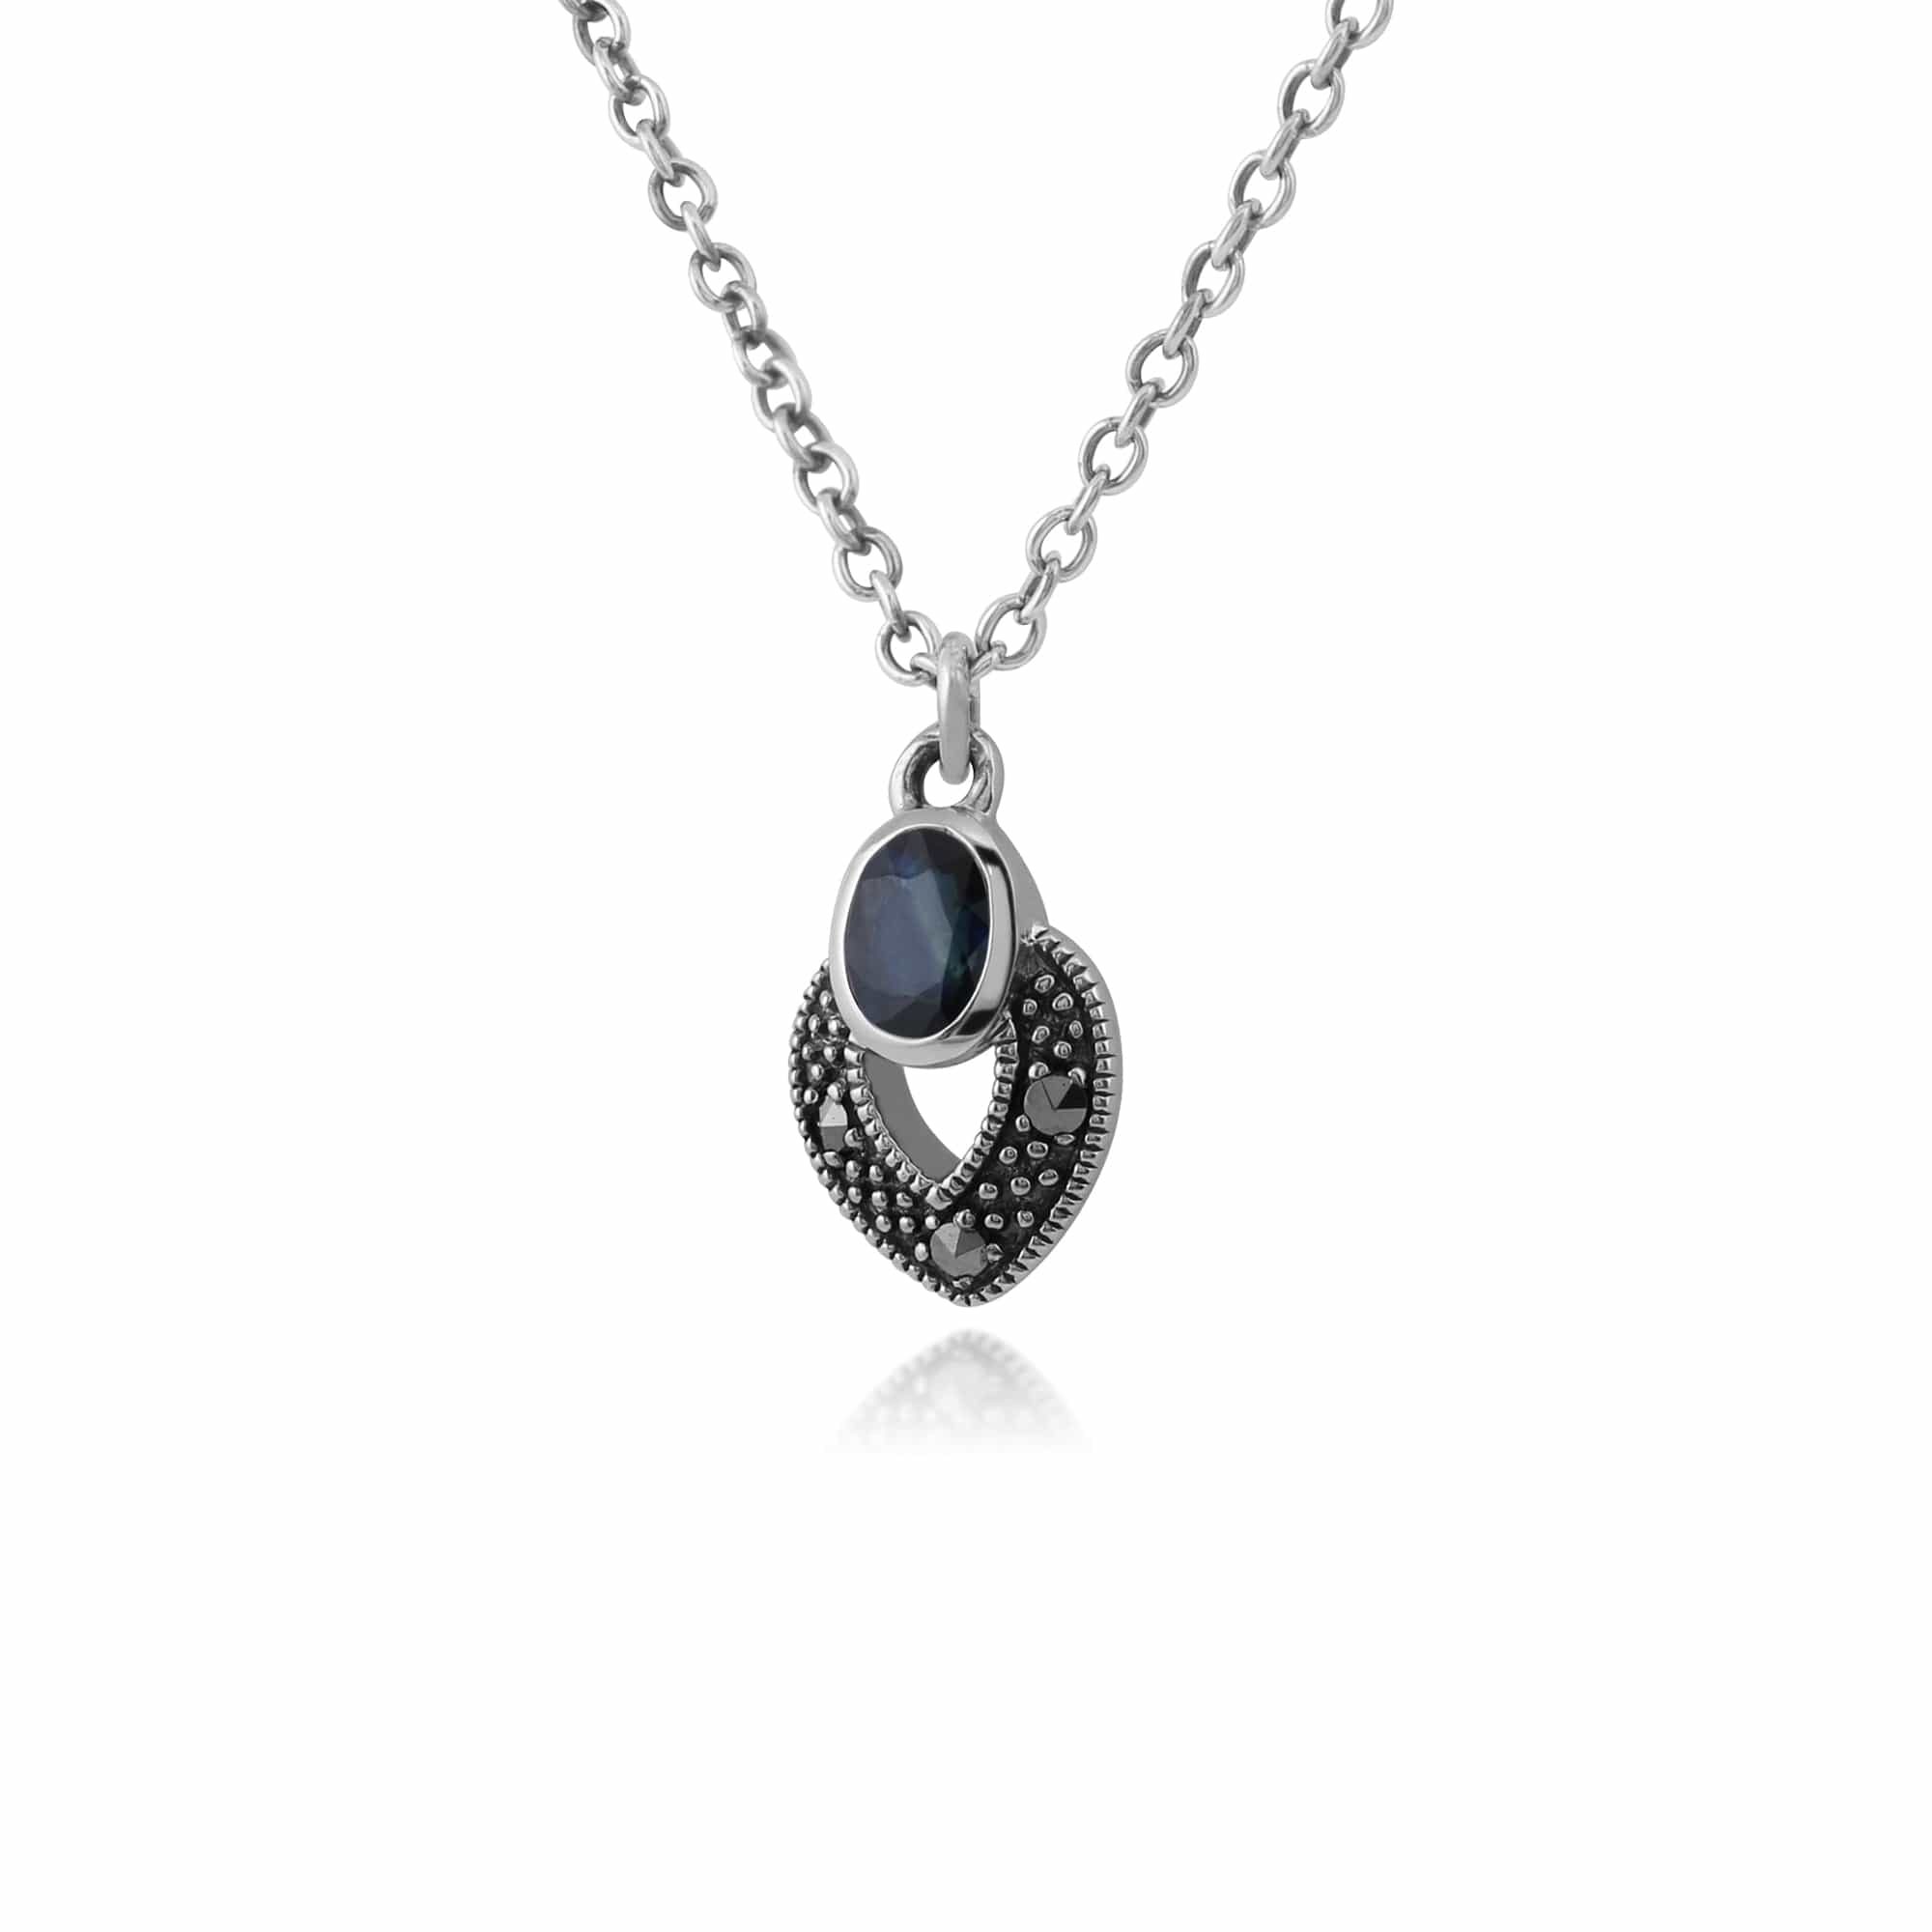 214N688212925 Art Deco Style Oval Sapphire & Marcasite Necklace in 925 Sterling Silver 2